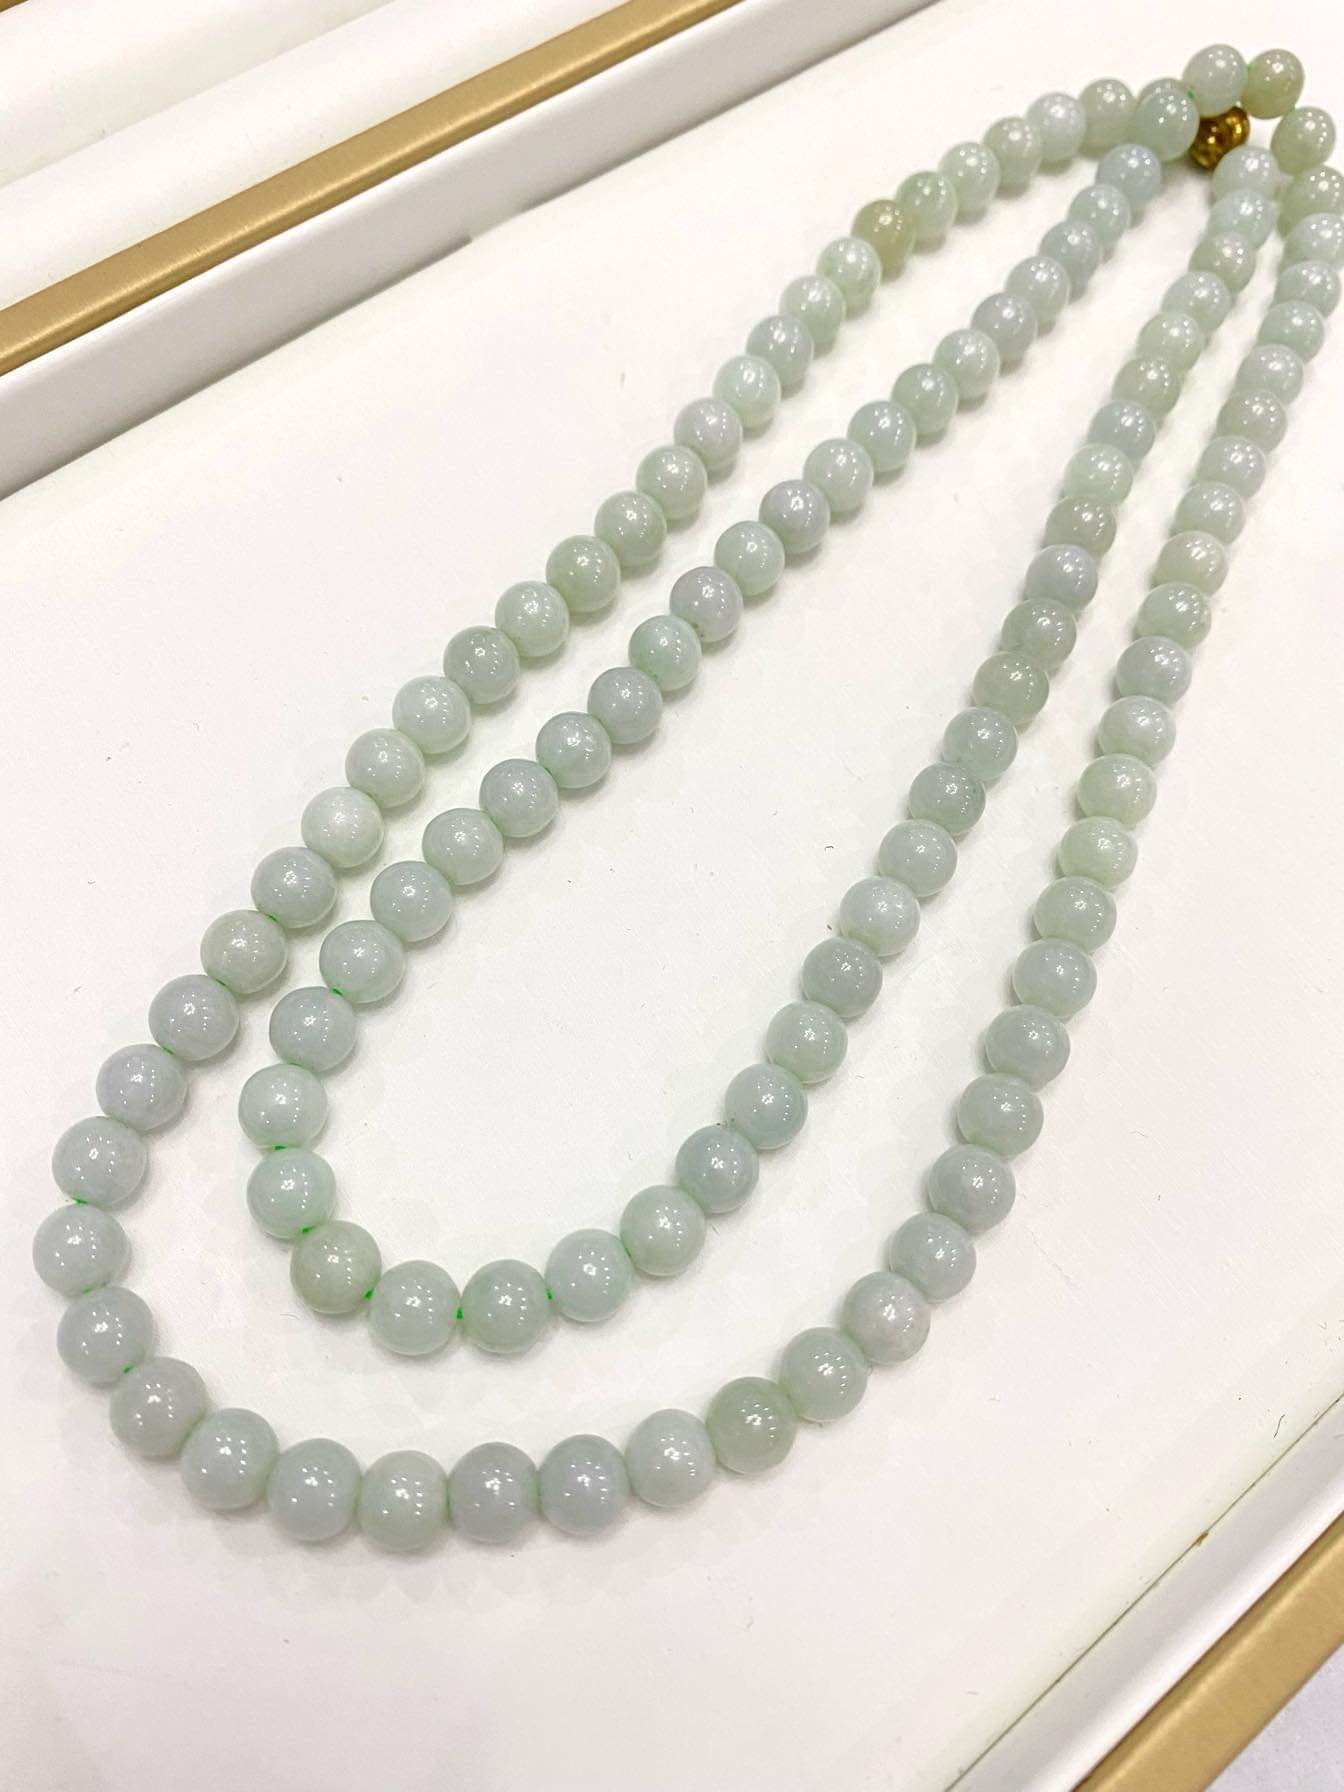 Necklace, premium Even tone Jade beads, 7 to 8 mm, 108 +count